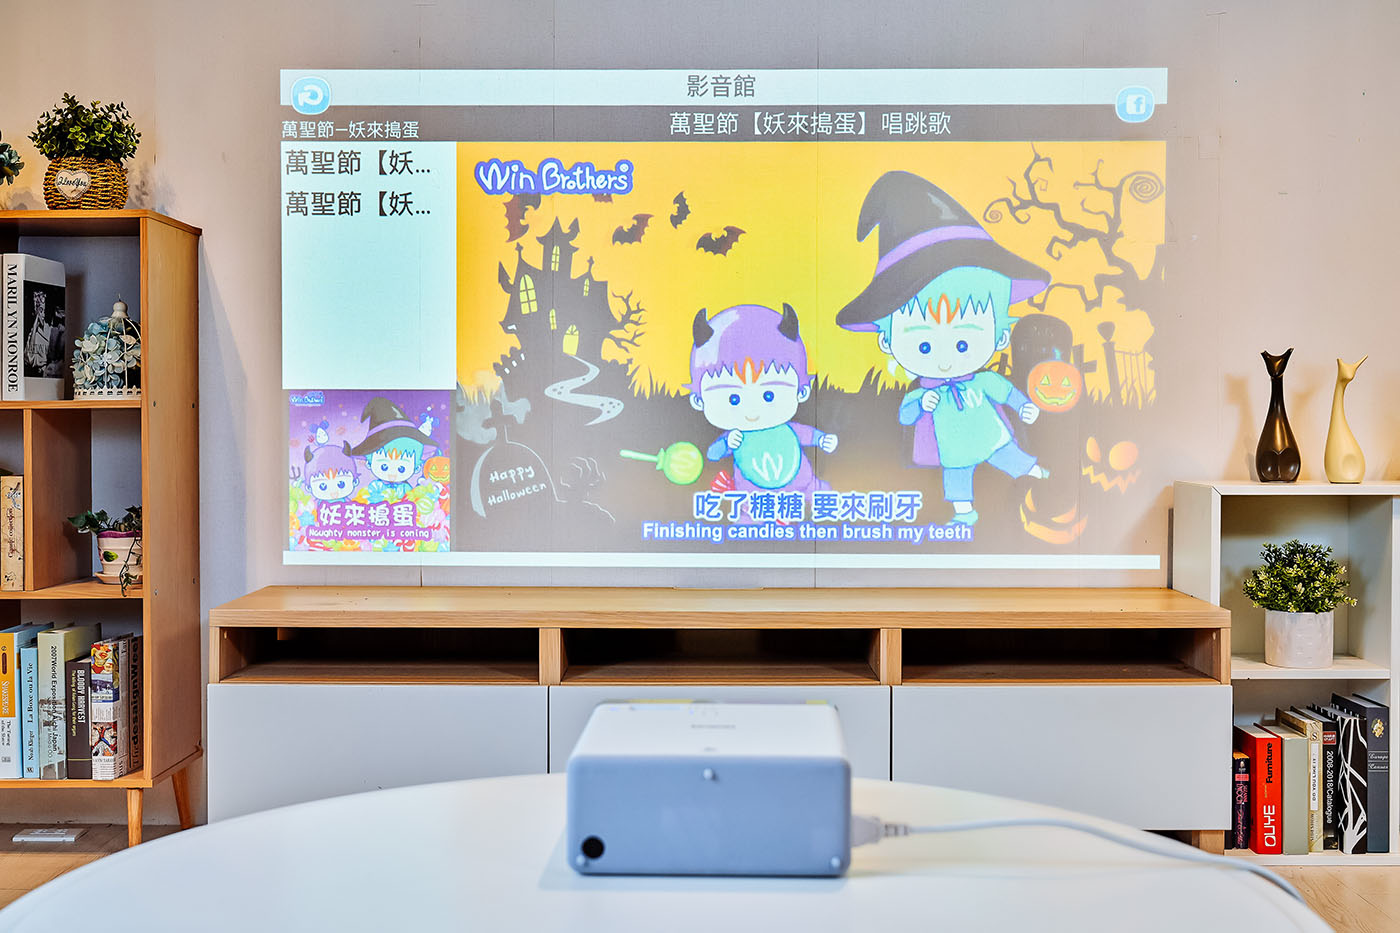 Don't forget entertainment for epidemic prevention, Epson EF-100WATV enjoys watching movies with parents and children, with clear pictures, healthy and eye-protecting